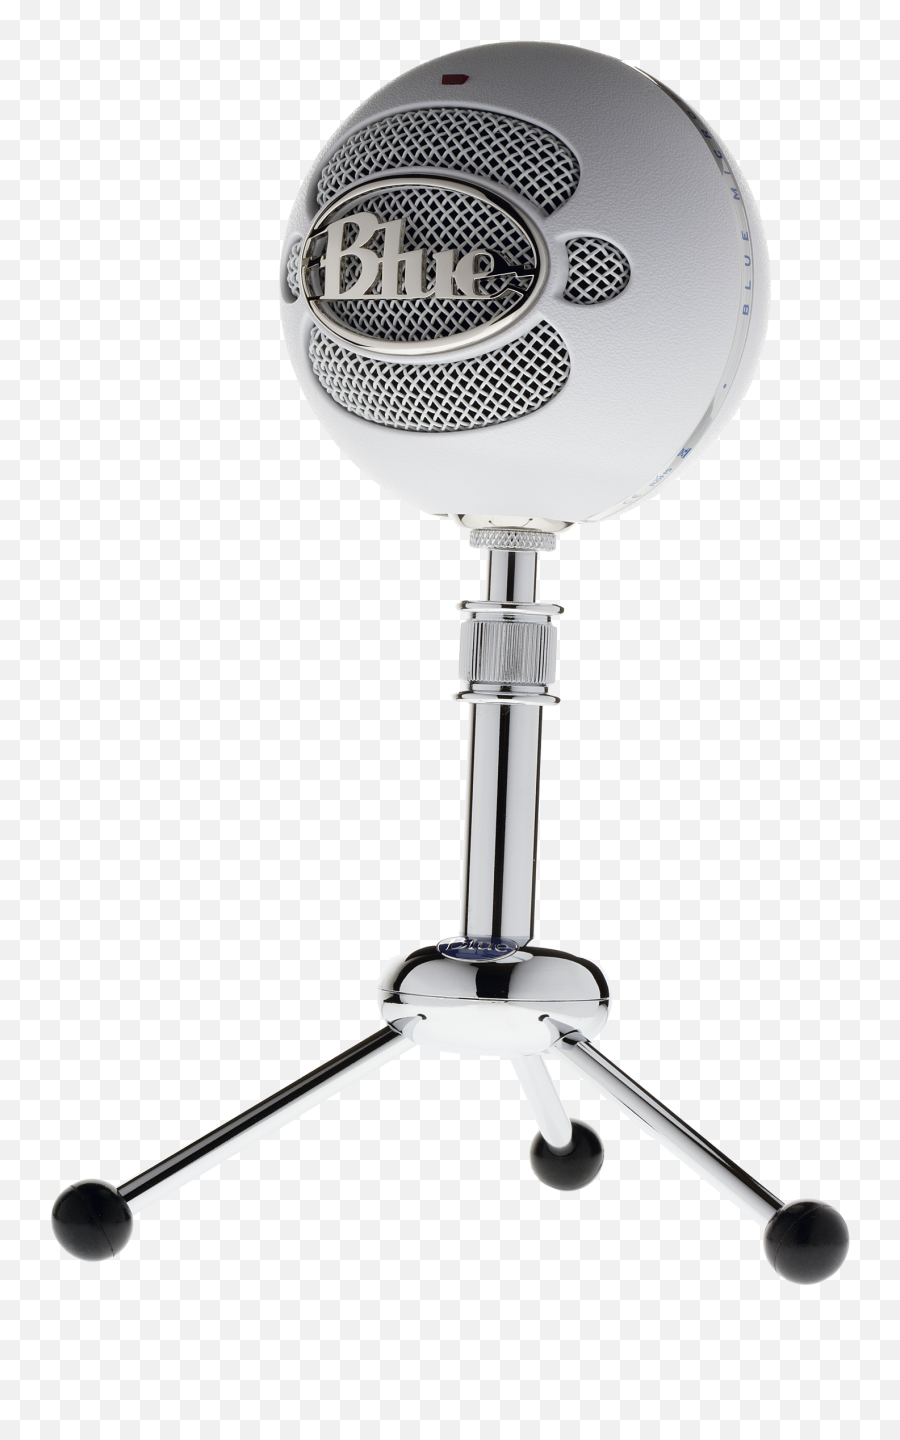 Download Hd Blue Snowball Ice - Blue Snowball Microphone Png,Blue Snowball Png